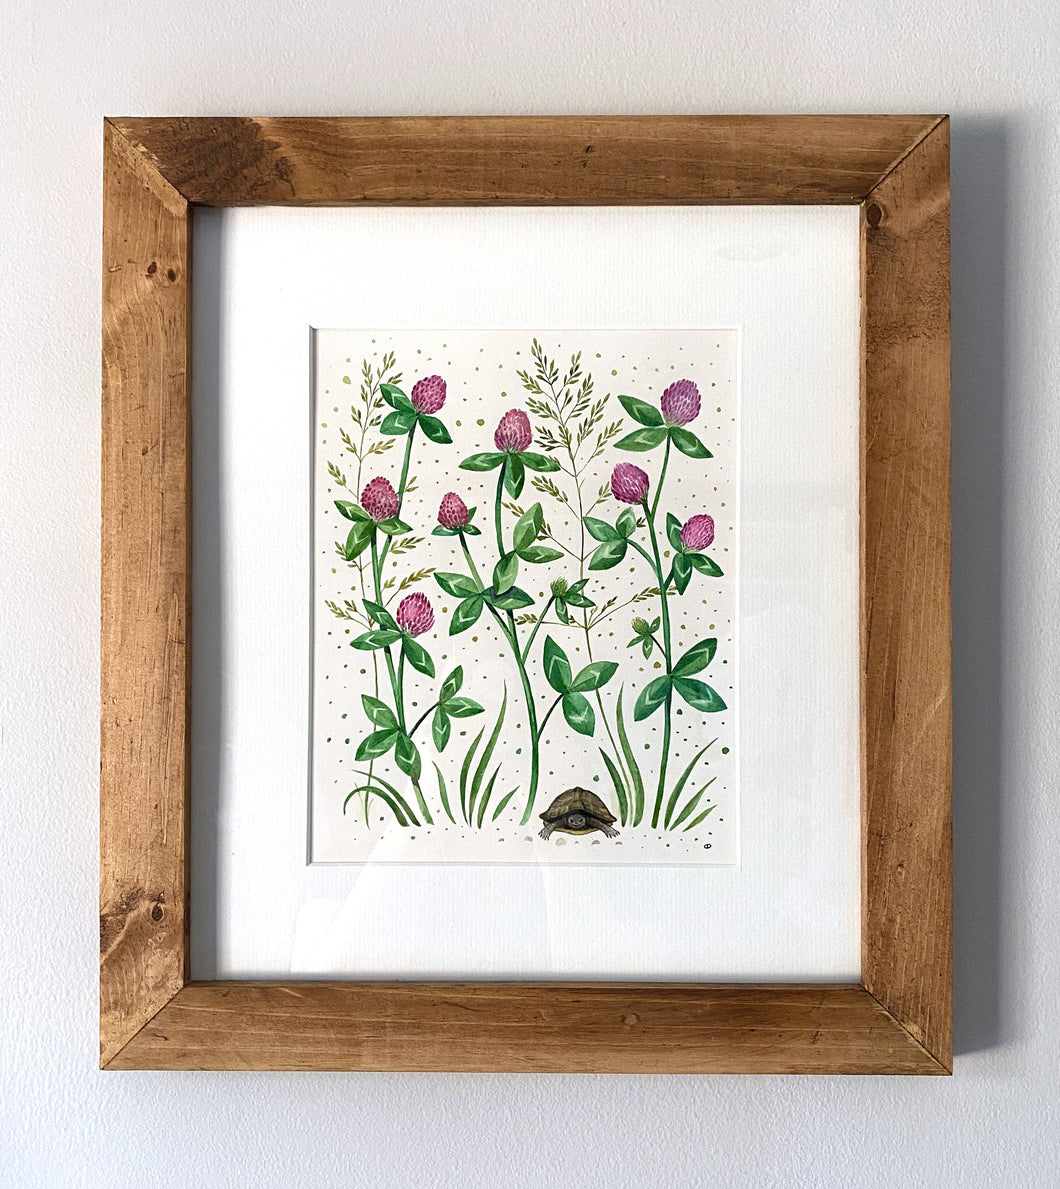 Natural Abundance, Clovers | Framed Original Watercolor by Cynthia Oswald